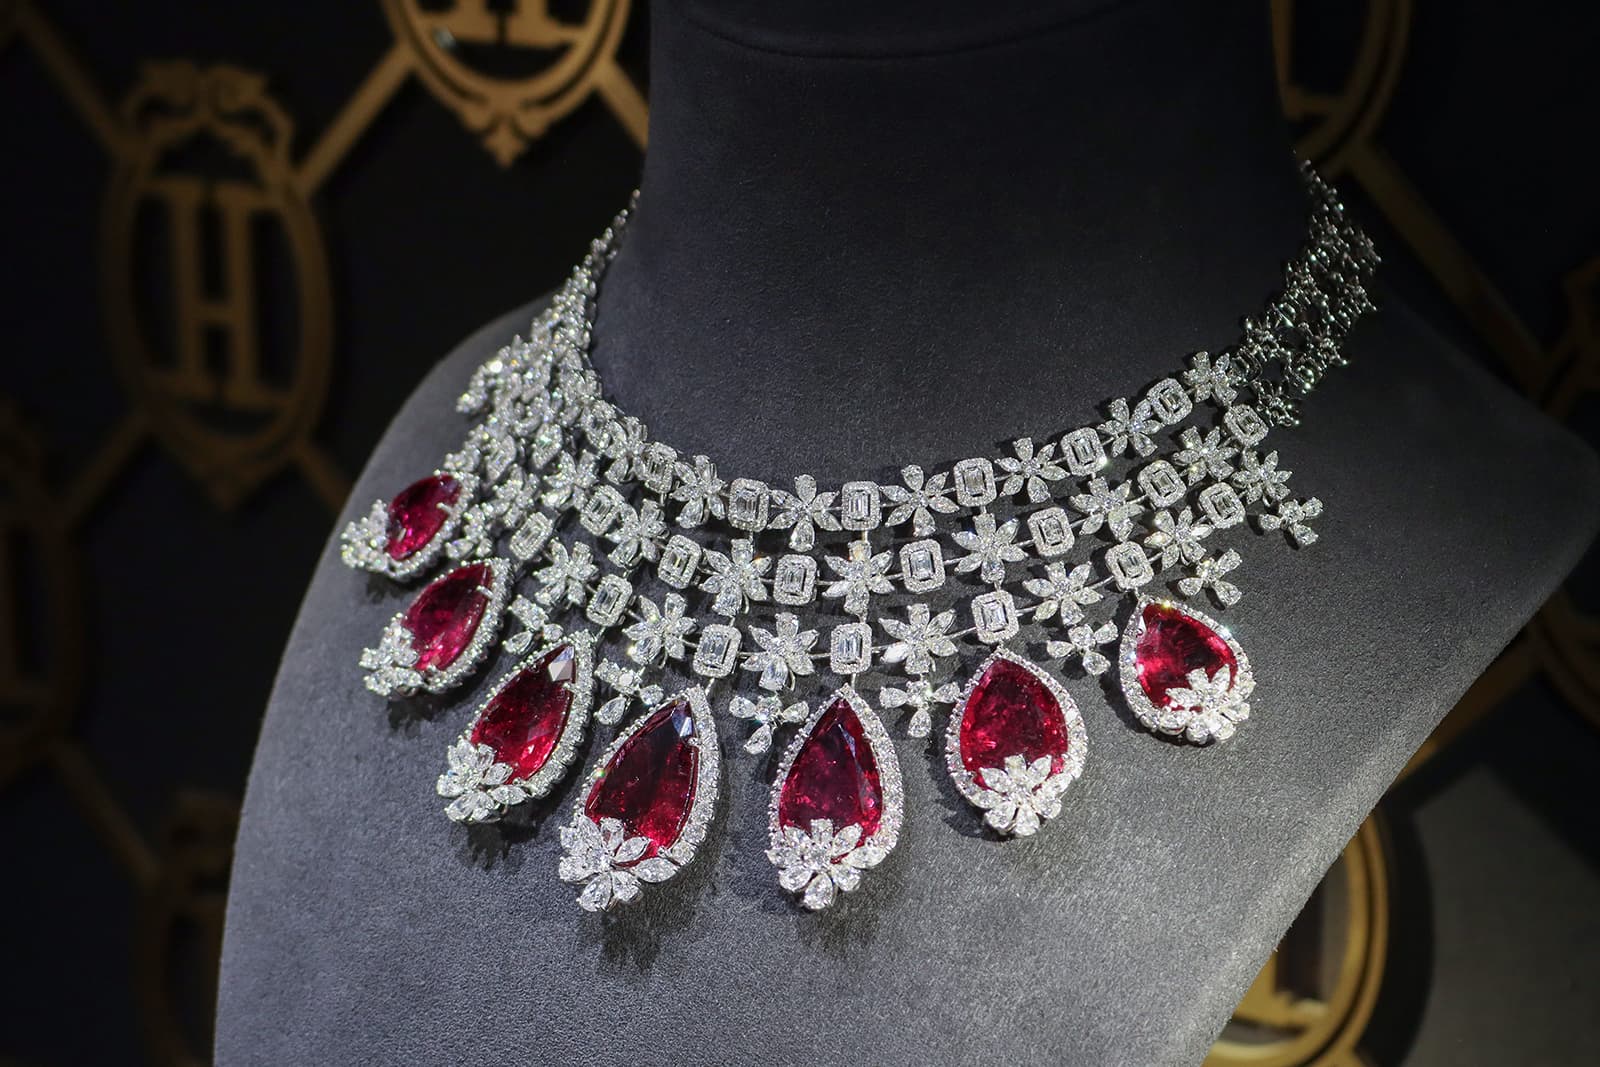 An epitome of bespoke luxury, this stunning necklace of tourmalines and fancy shaped diamonds embodies the craftsmanship and design philosophy at Hazoorilal Legacy